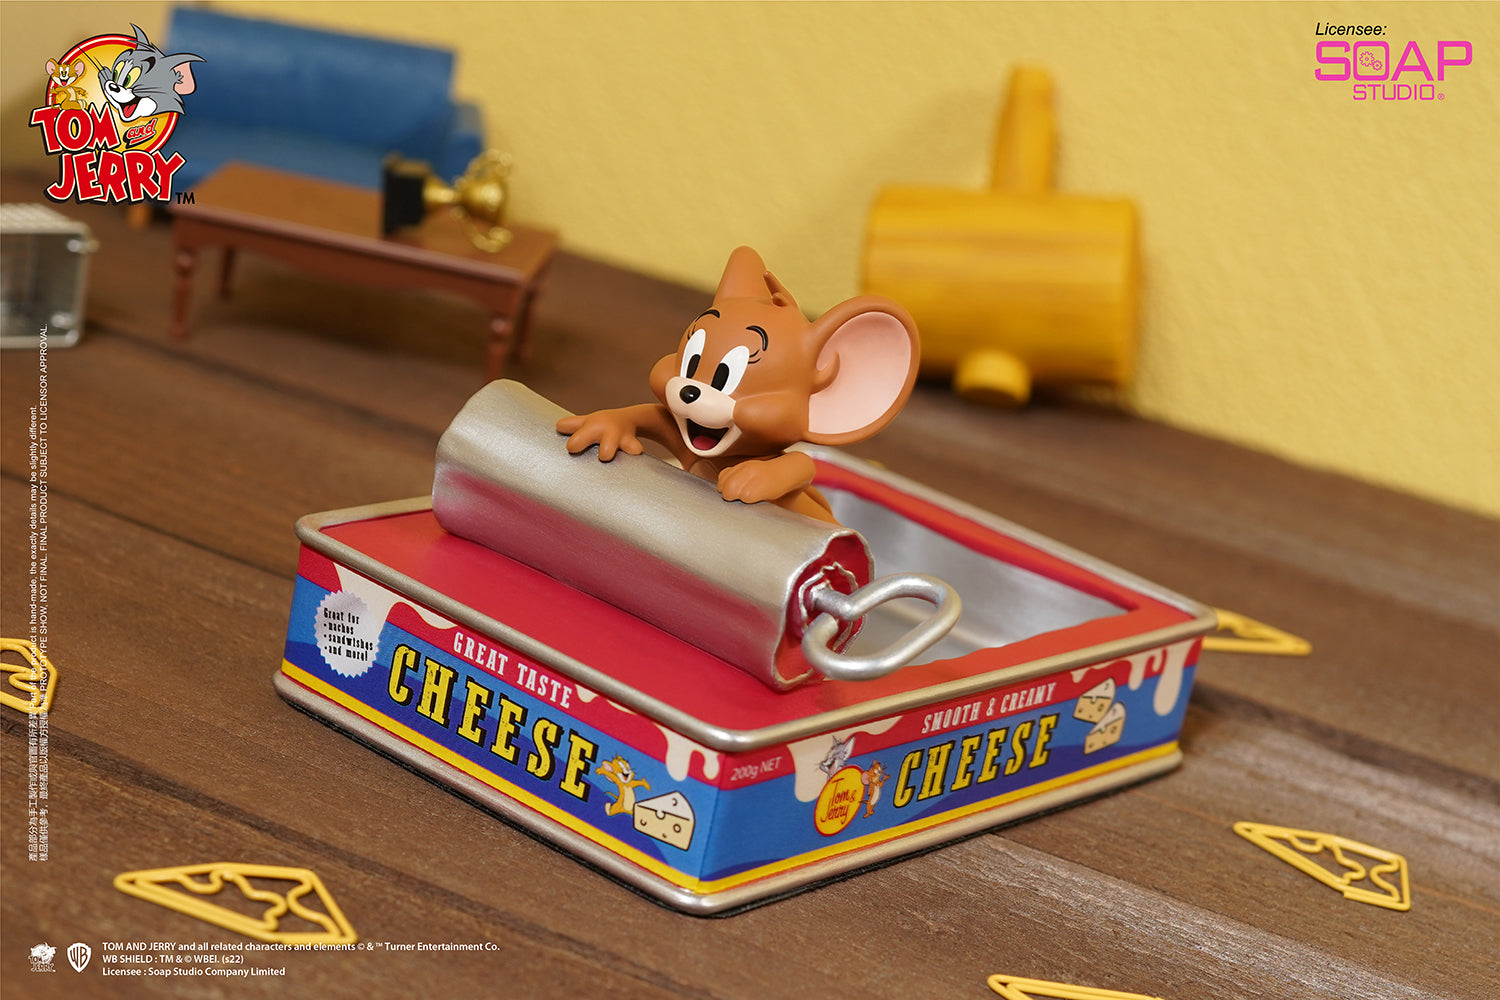 Soap Studio CA238 Tom and Jerry - Canned Jerry Paperclip Holder